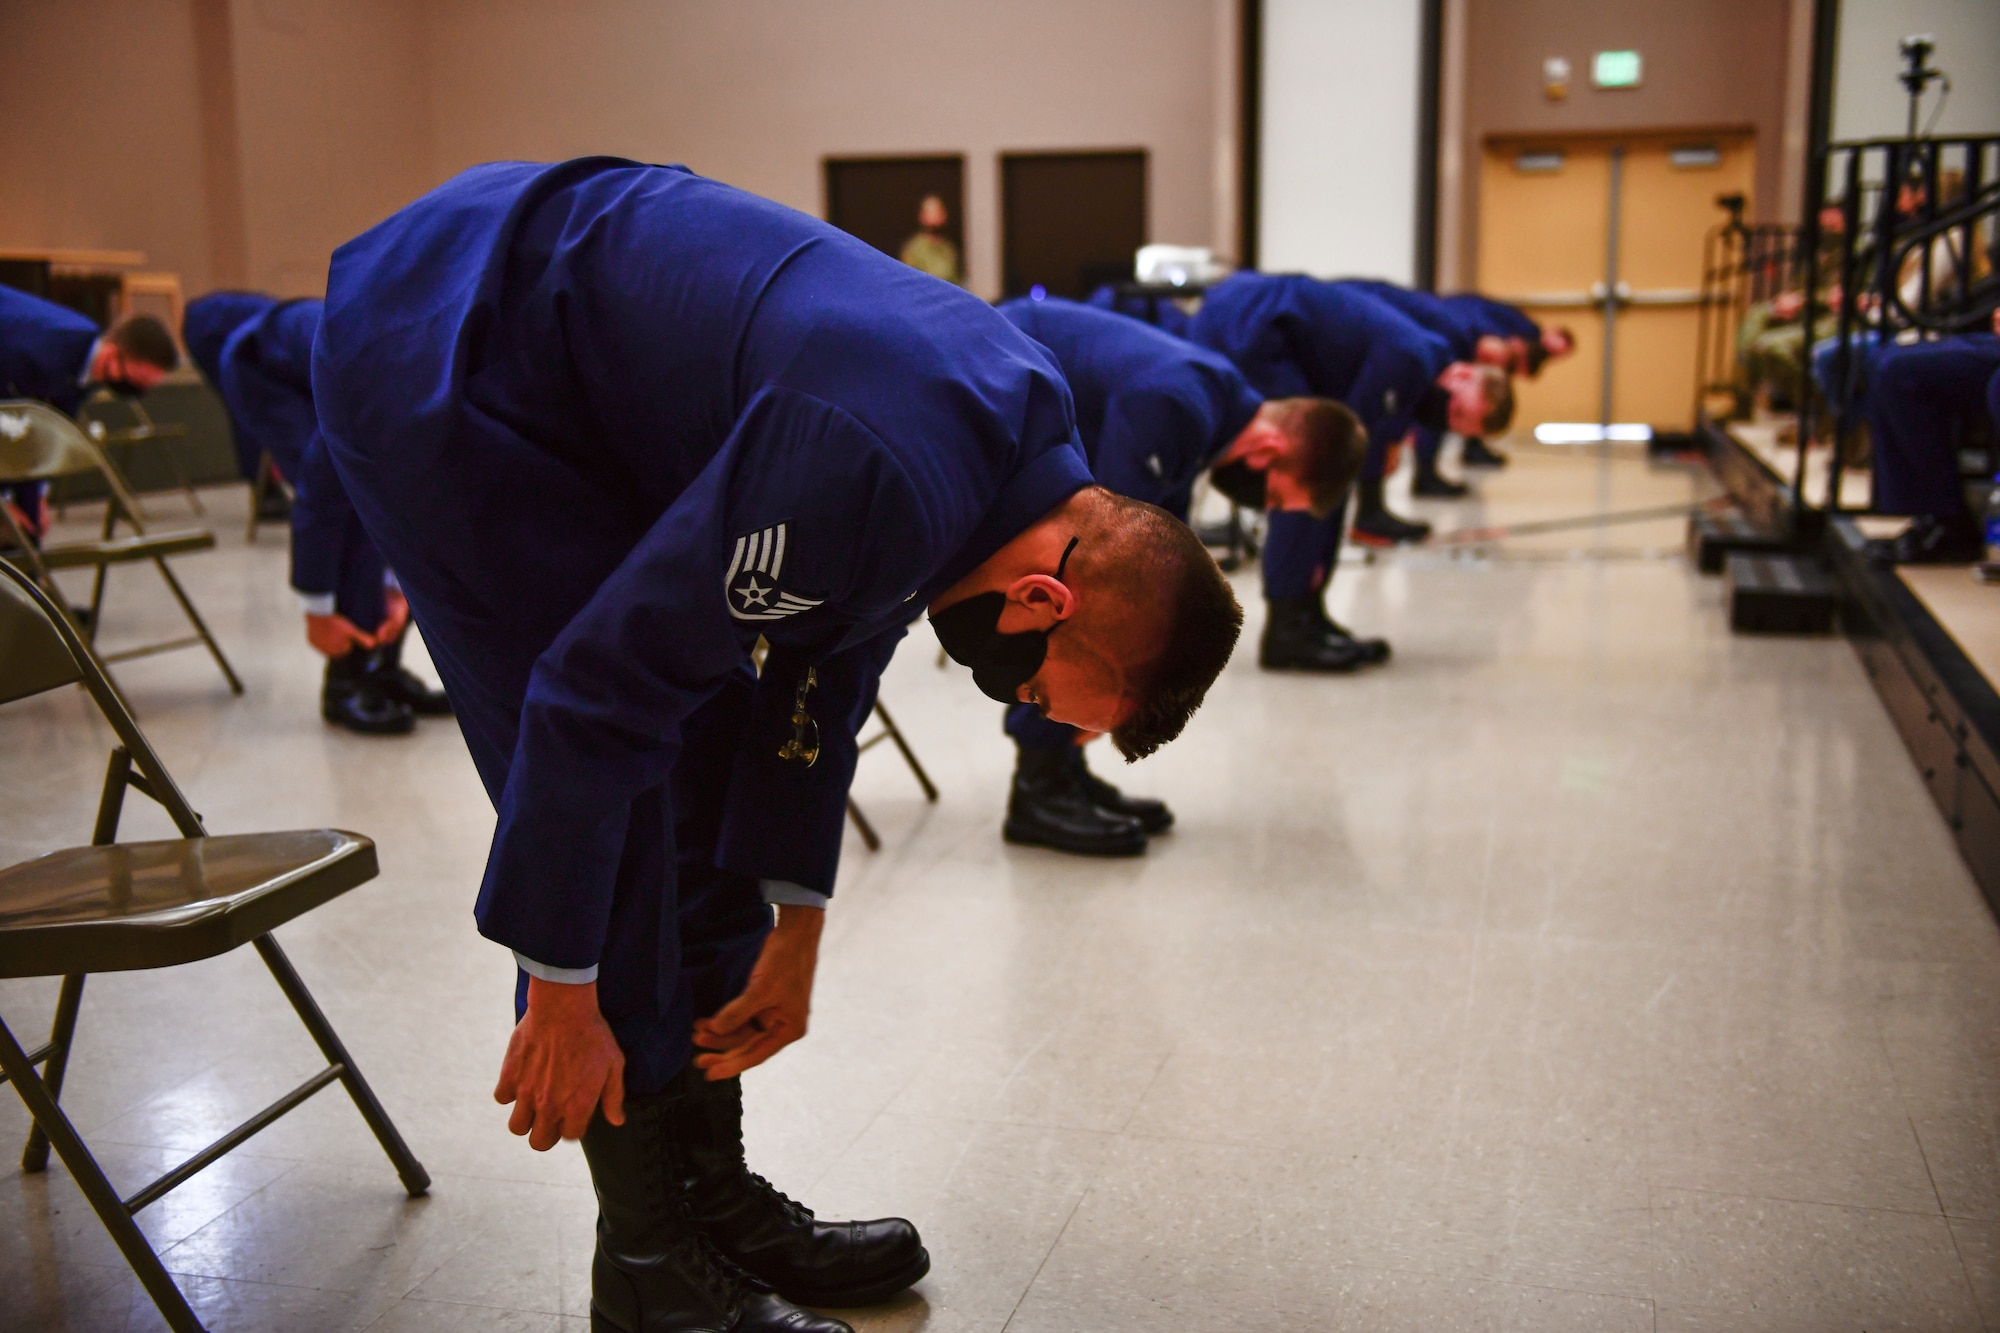 U.S. Air Force 66th Training Squadron Survival, Evasion, Resistance and Escape Specialist Course graduates blouse their boots upon completing the SERE Specialist Apprentice Course at Fairchild Air Force Base, Washington, January 8, 2021. Prior to becoming SERE specialists, candidates go through a strenuous six-month training pipeline where normal attrition rates average about 50 percent due to the rigorous nature of the training. (U.S. Air Force photo by Senior Airman Ryan Gomez)